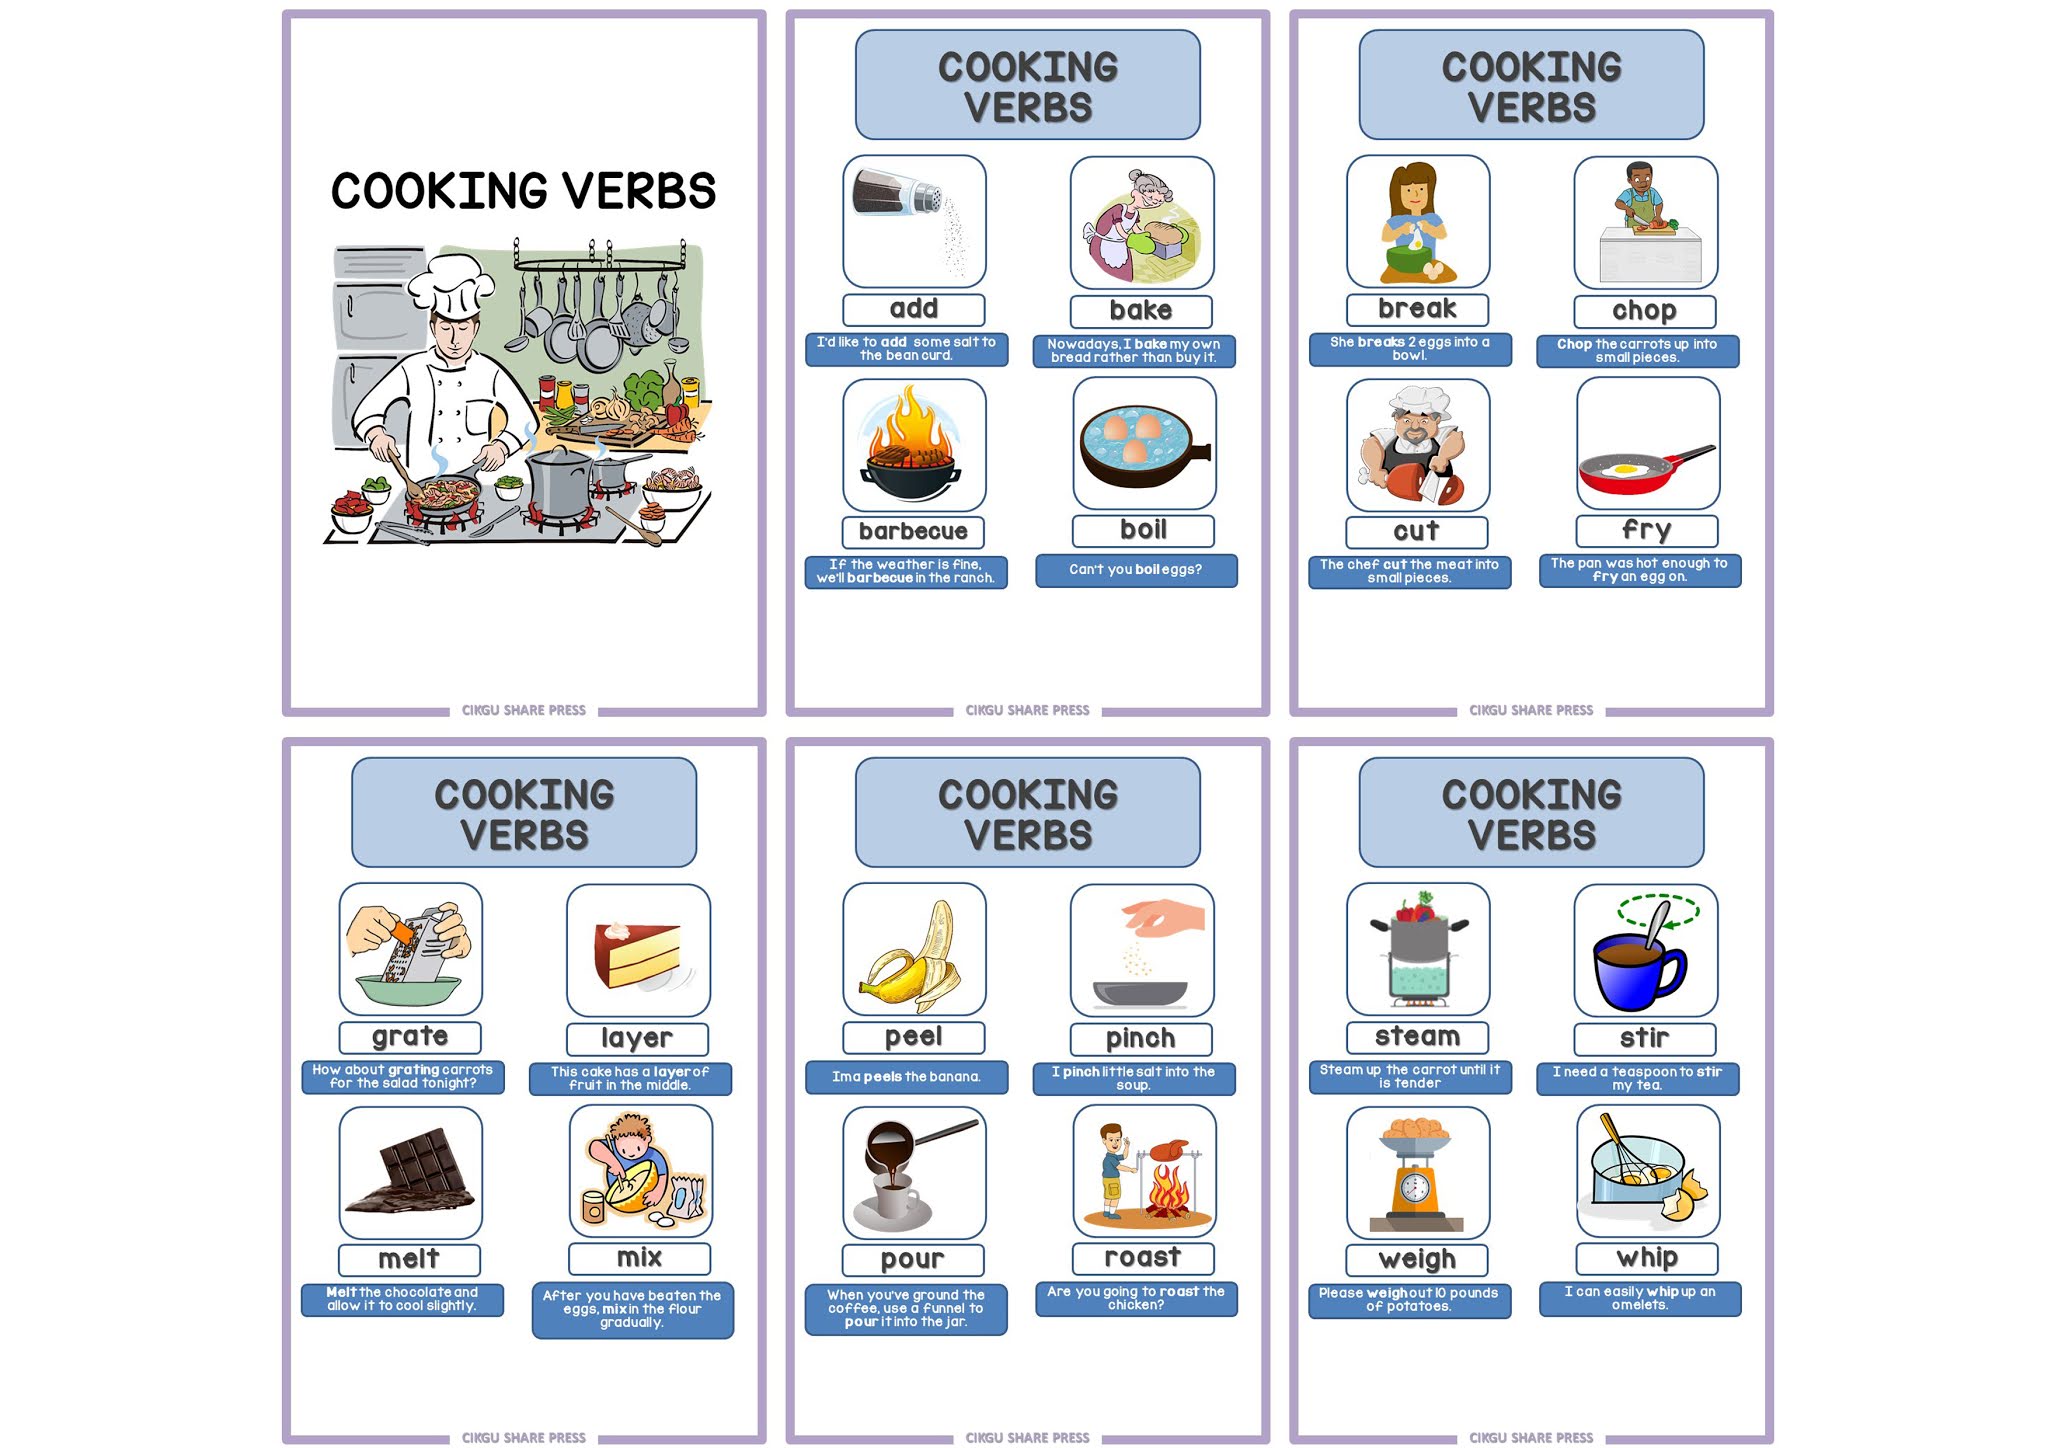 Cooking verbs Dictionary. Cooking verbs picture Dictionary. To spread Cooking verb. Worksheets how to Cook verbs.